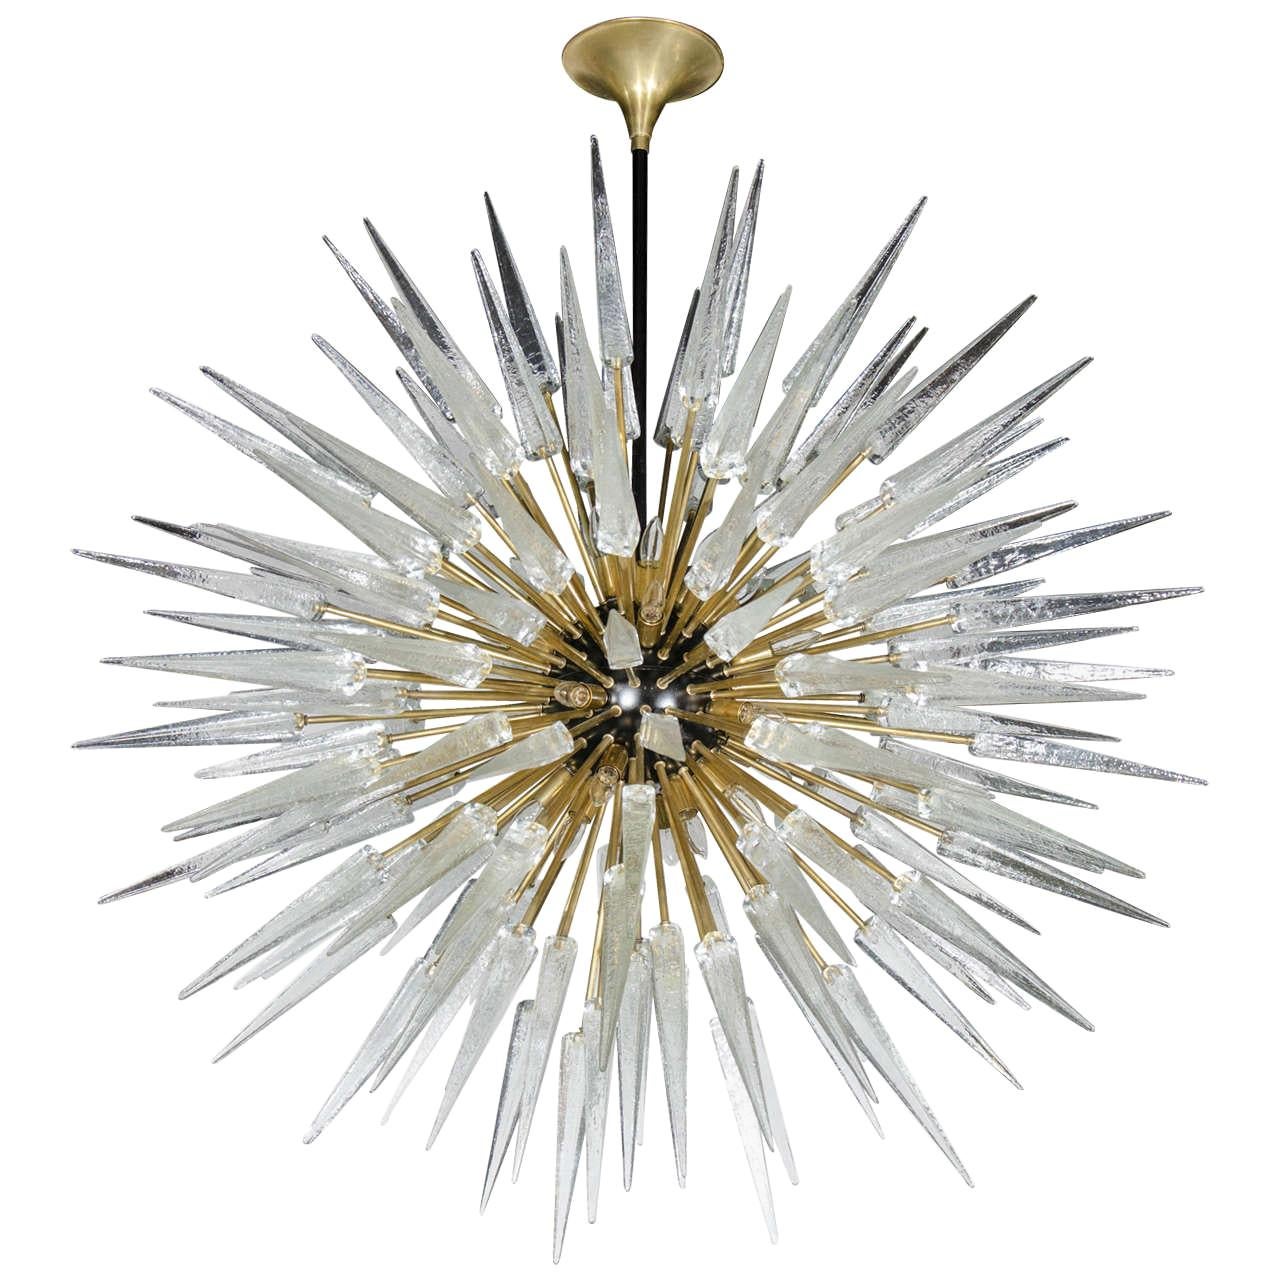 Impressive and Monumental Murano Glass Spiked Starburst Chandelier